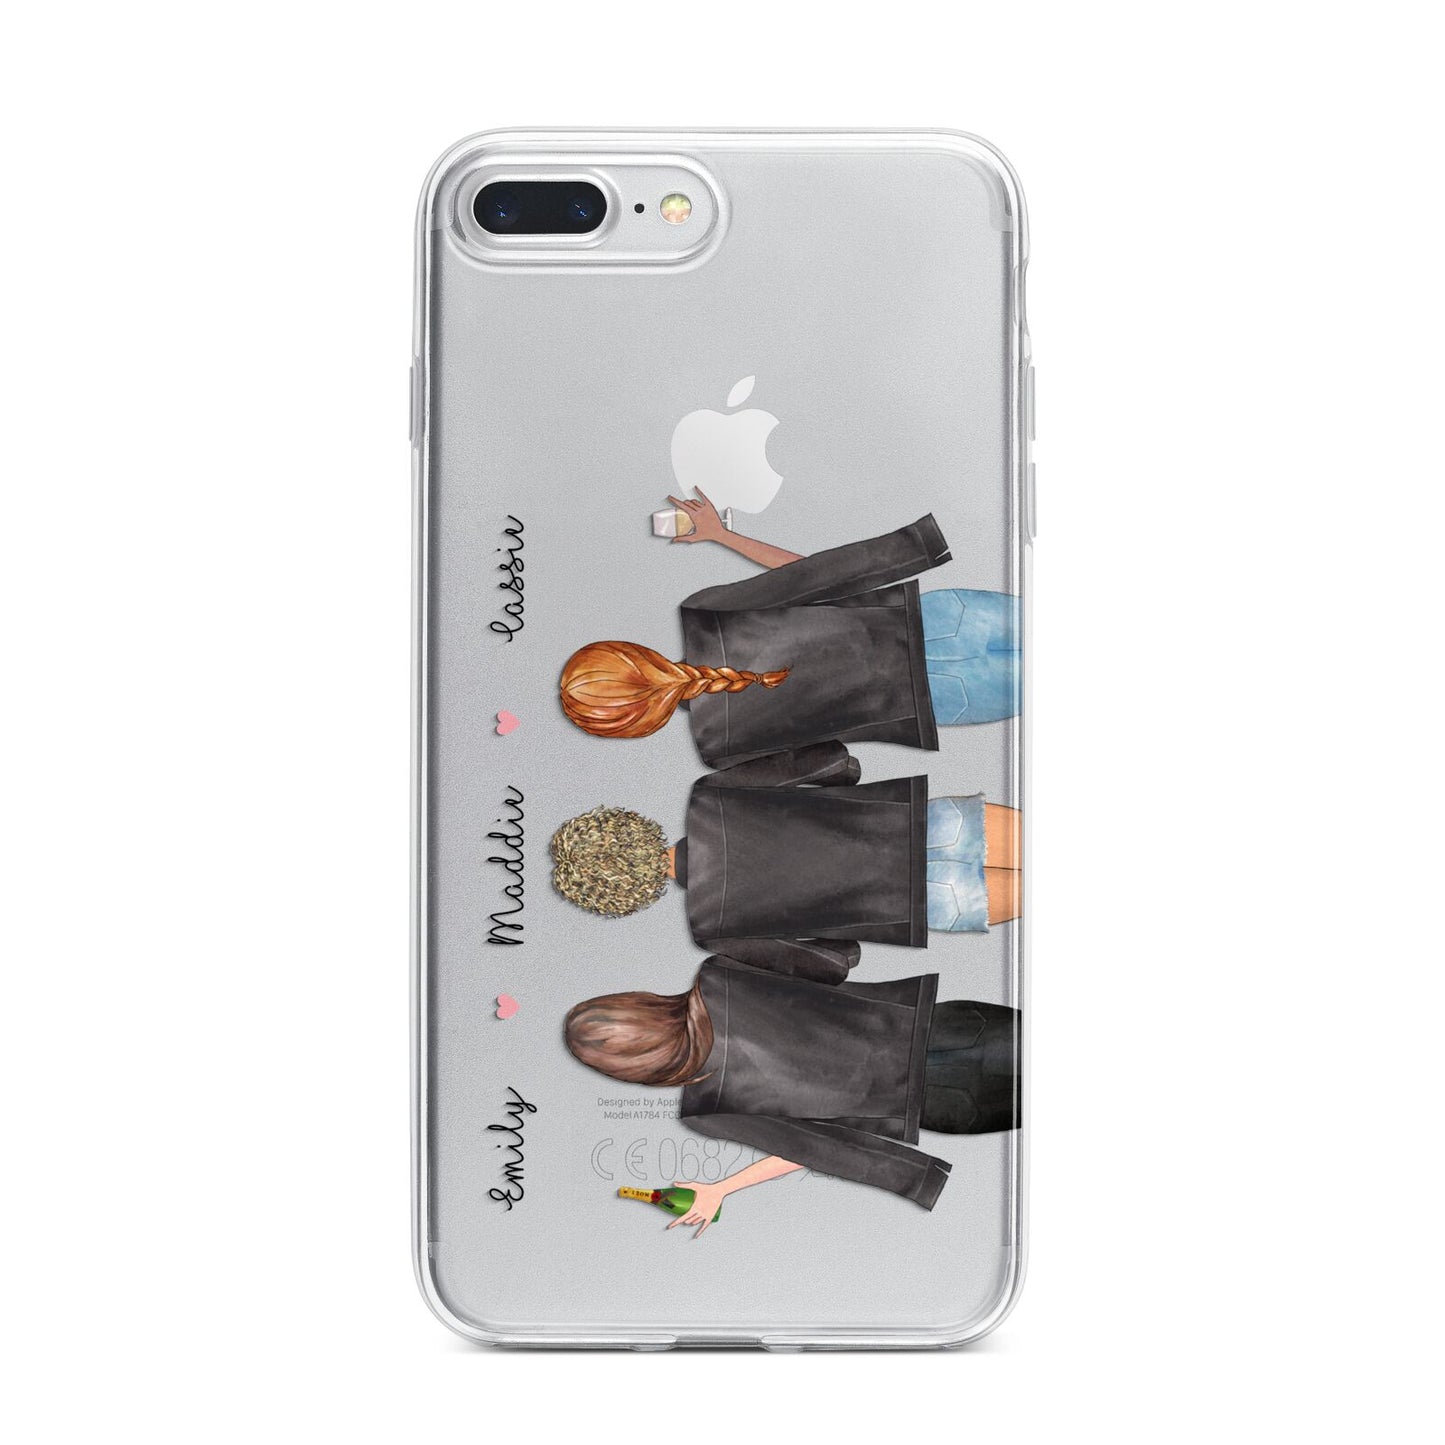 3 Best Friends with Names iPhone 7 Plus Bumper Case on Silver iPhone